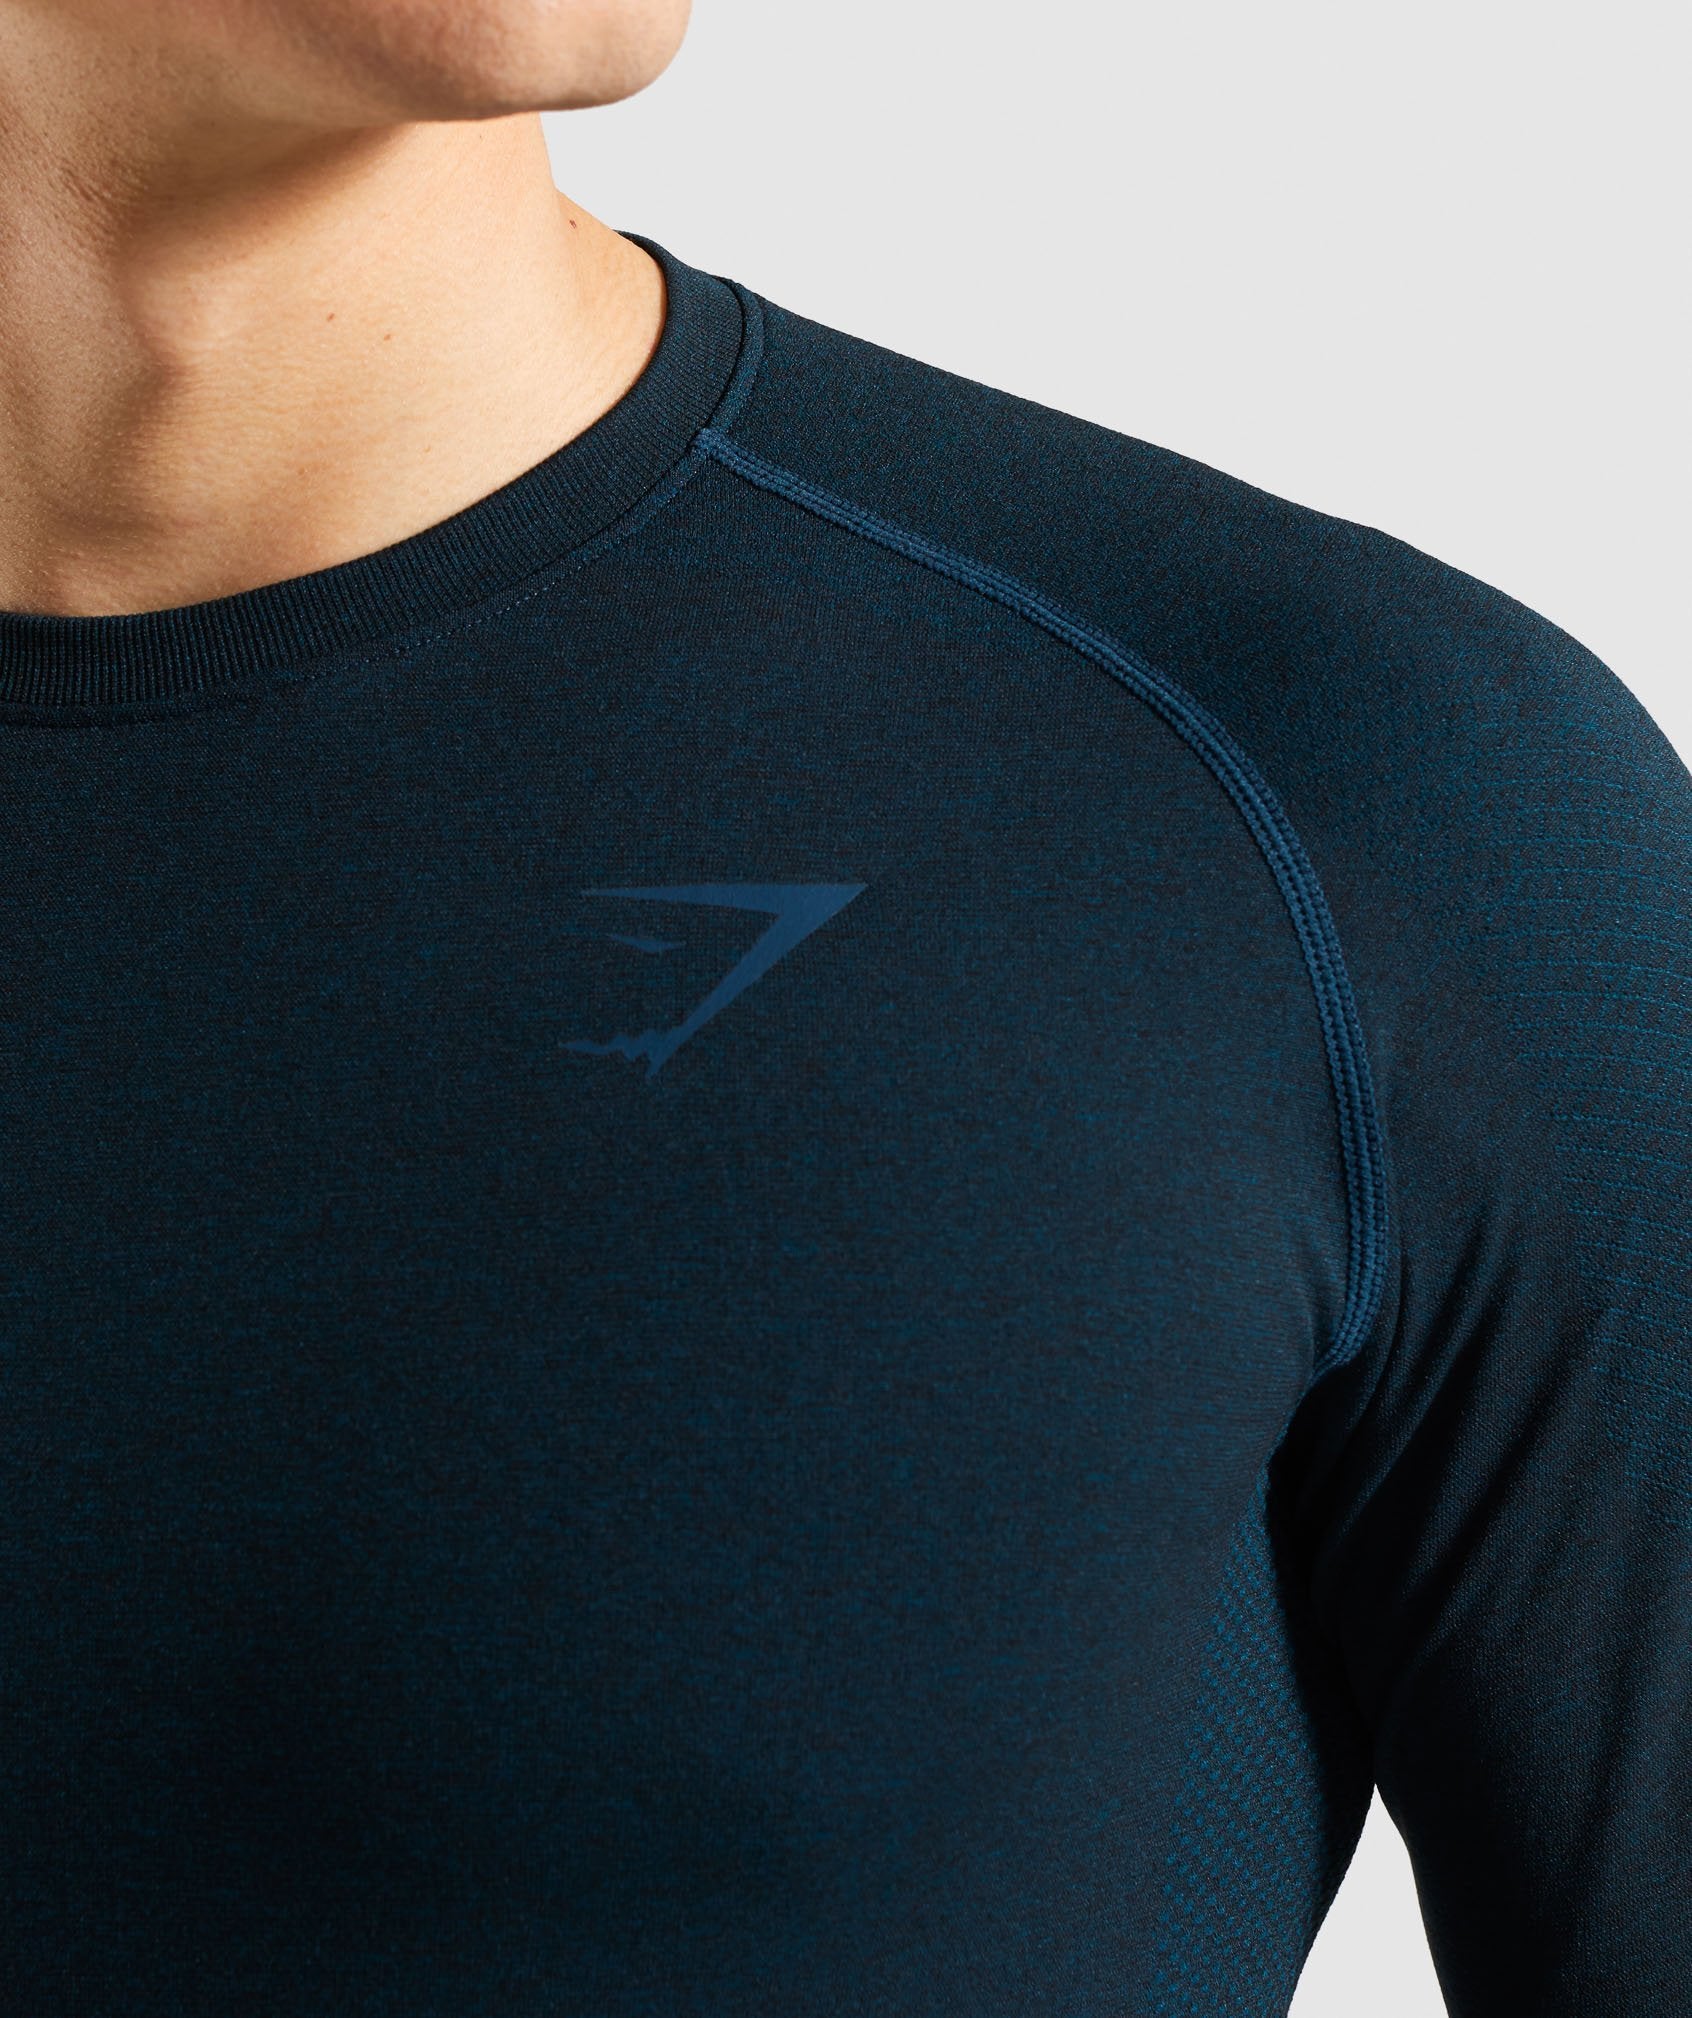 Define Seamless Long Sleeve T-Shirt in Blue - view 6